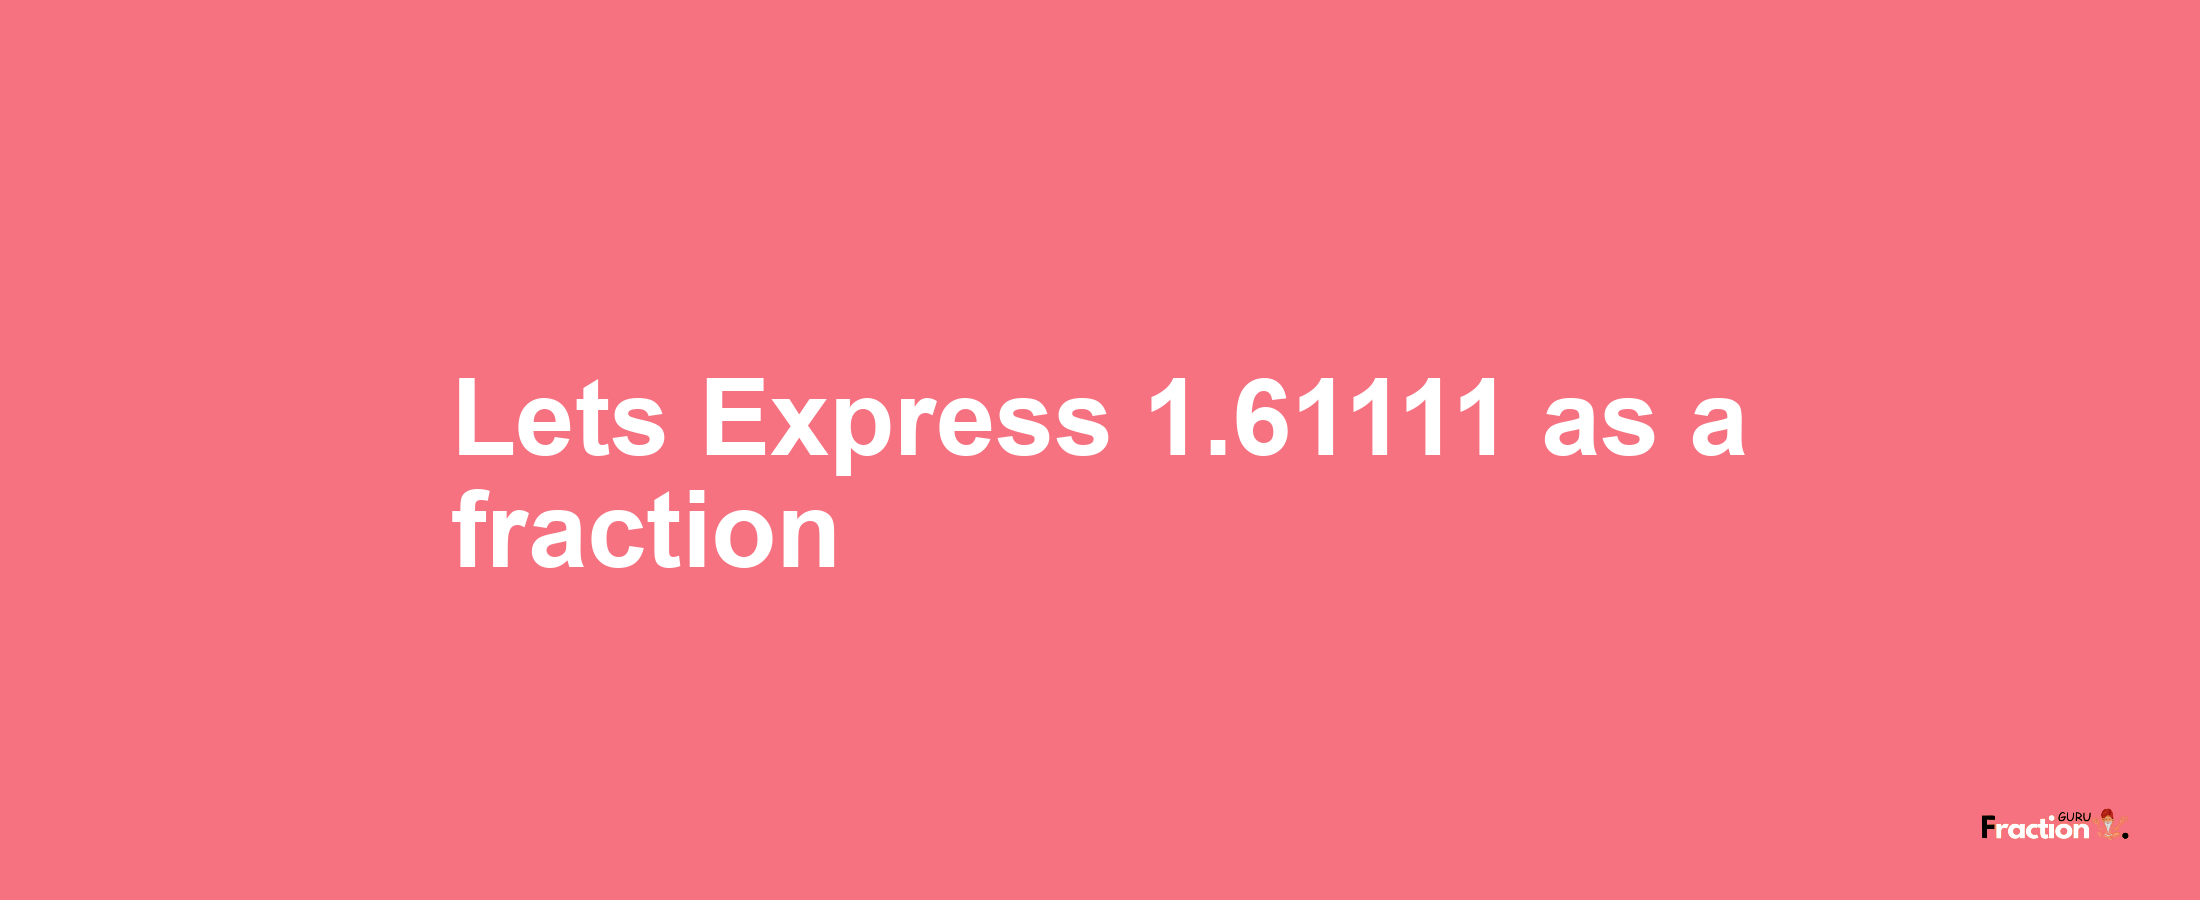 Lets Express 1.61111 as afraction